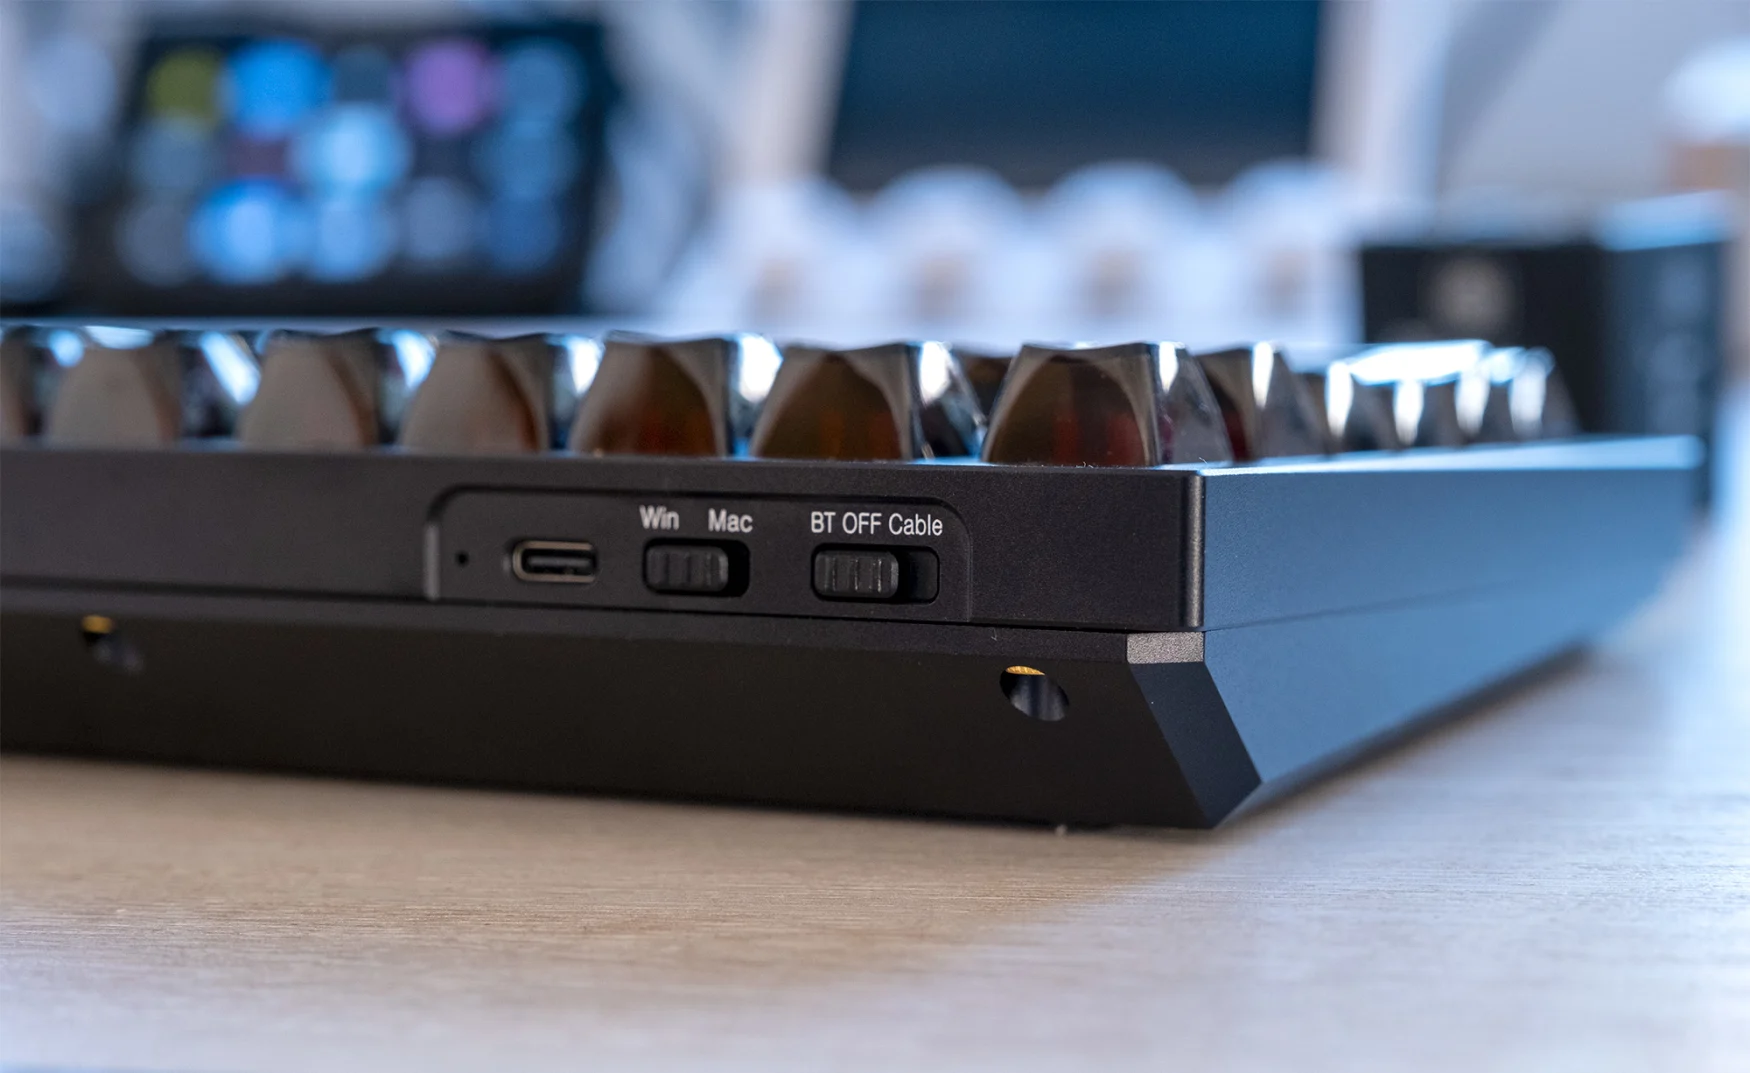 The rearside of the Q1 Pro mechanical keyboard is shown along with the switch to turn on Bluetooth